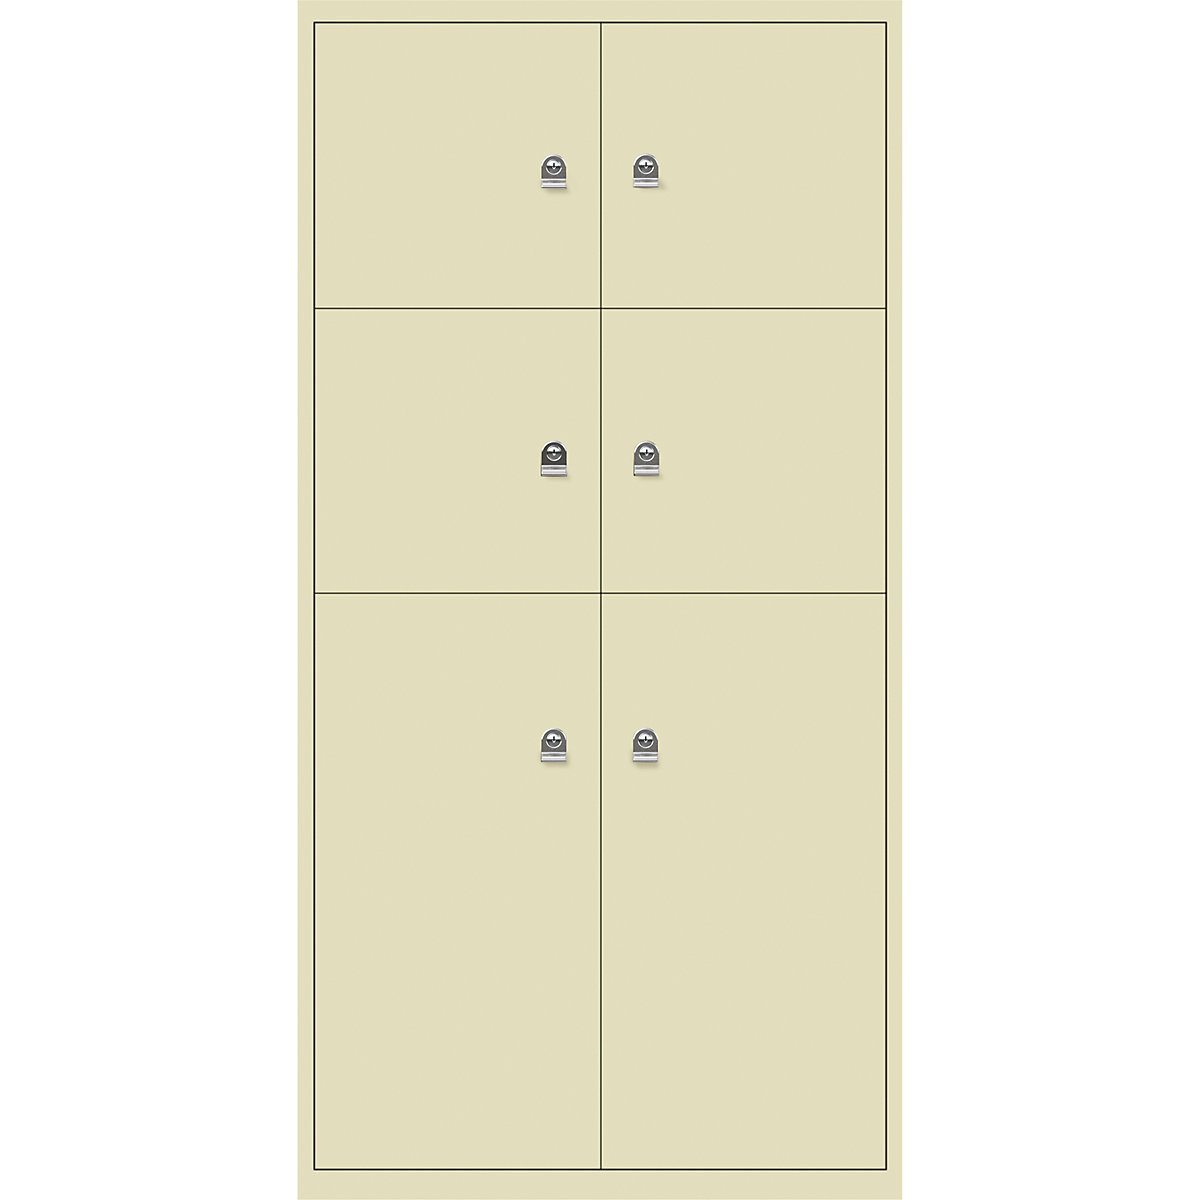 LateralFile™ lodge – BISLEY, with 6 lockable compartments, height 4 x 375 mm, 2 x 755 mm, cream-11